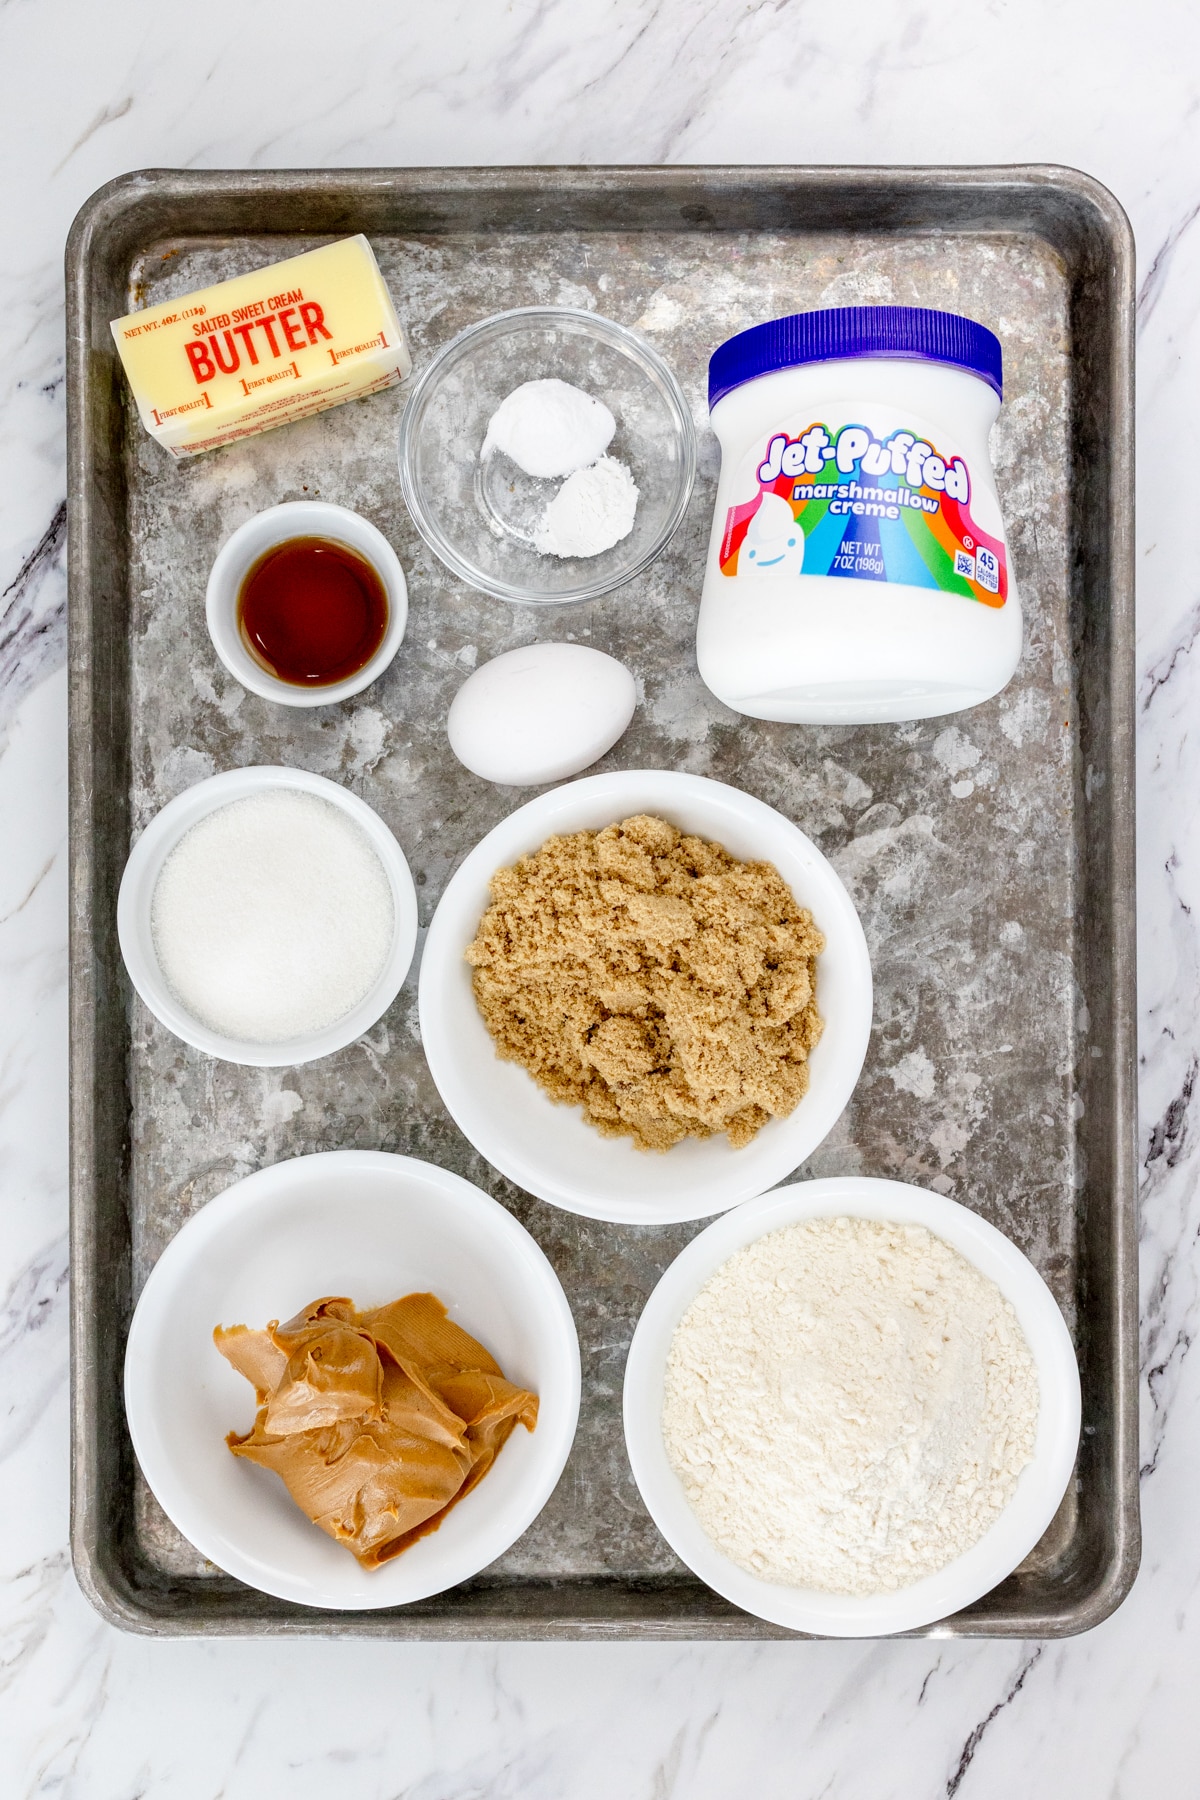 Top view of ingredients needed to make Fluffernutter Cookies in small bowls on a baking tray.